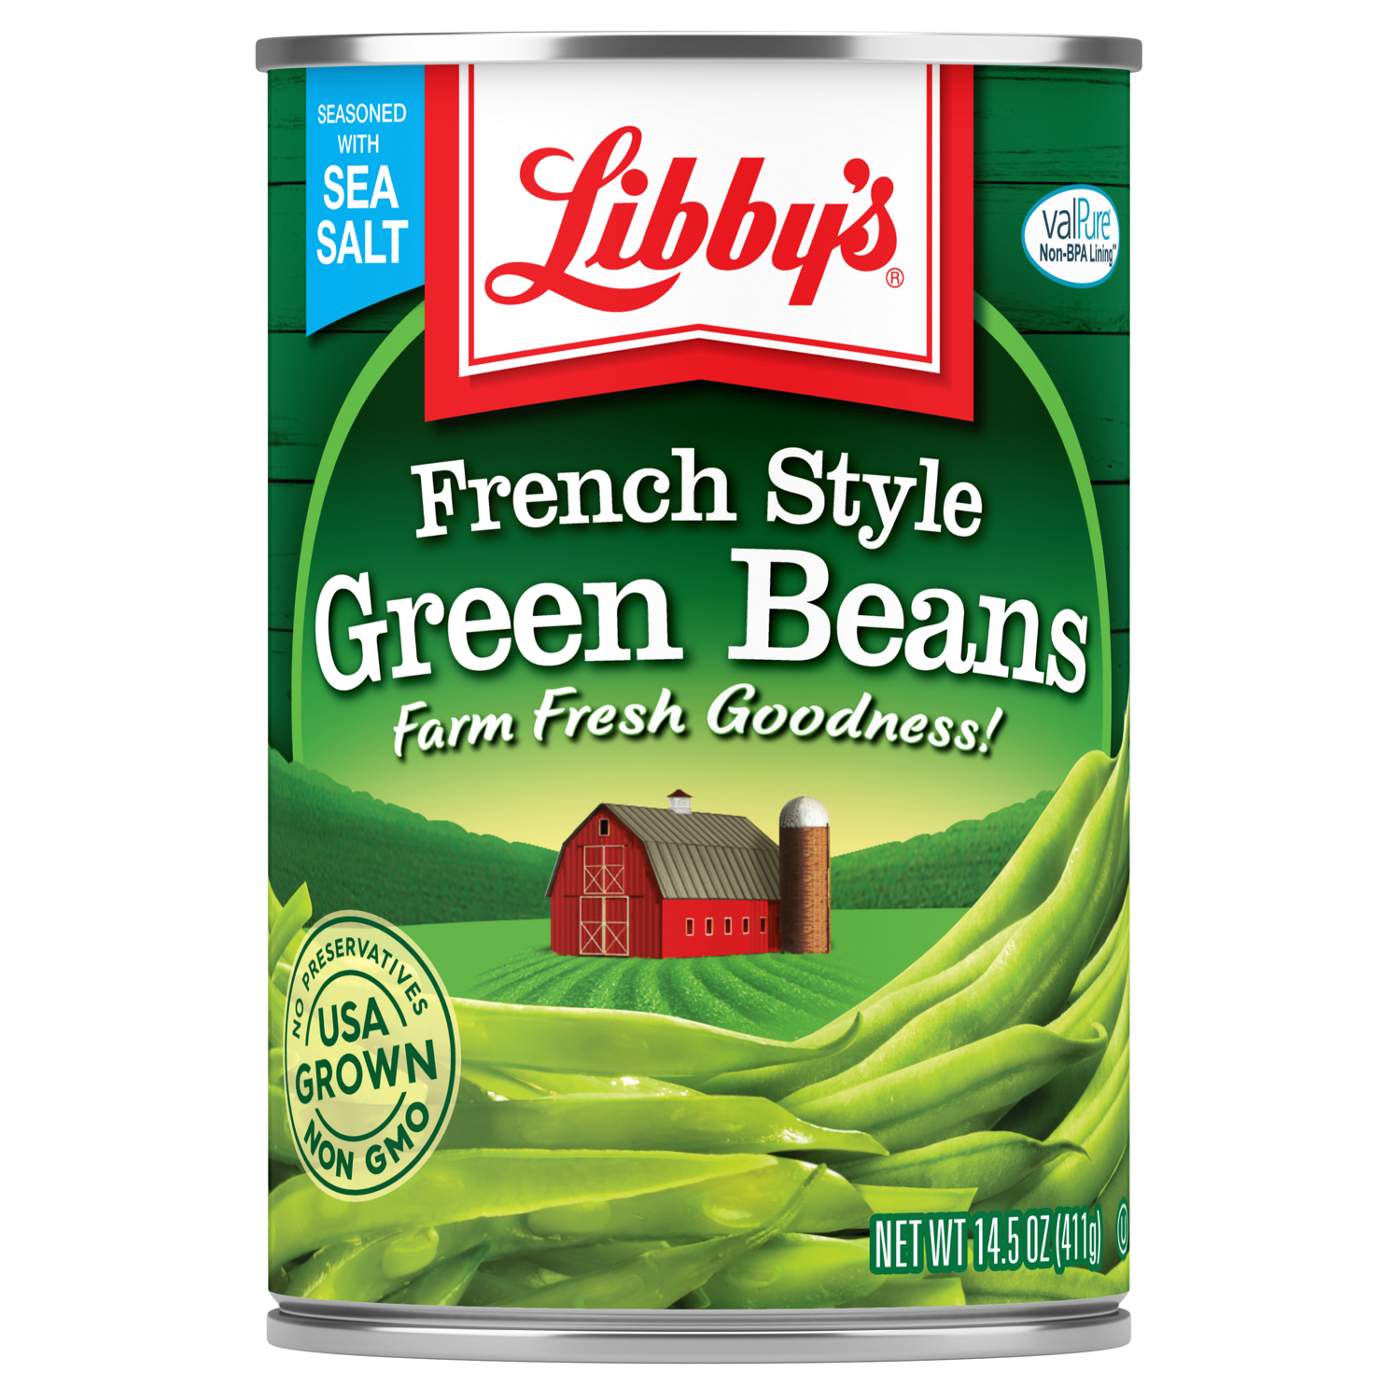 Libby's French Style Green Beans; image 1 of 4